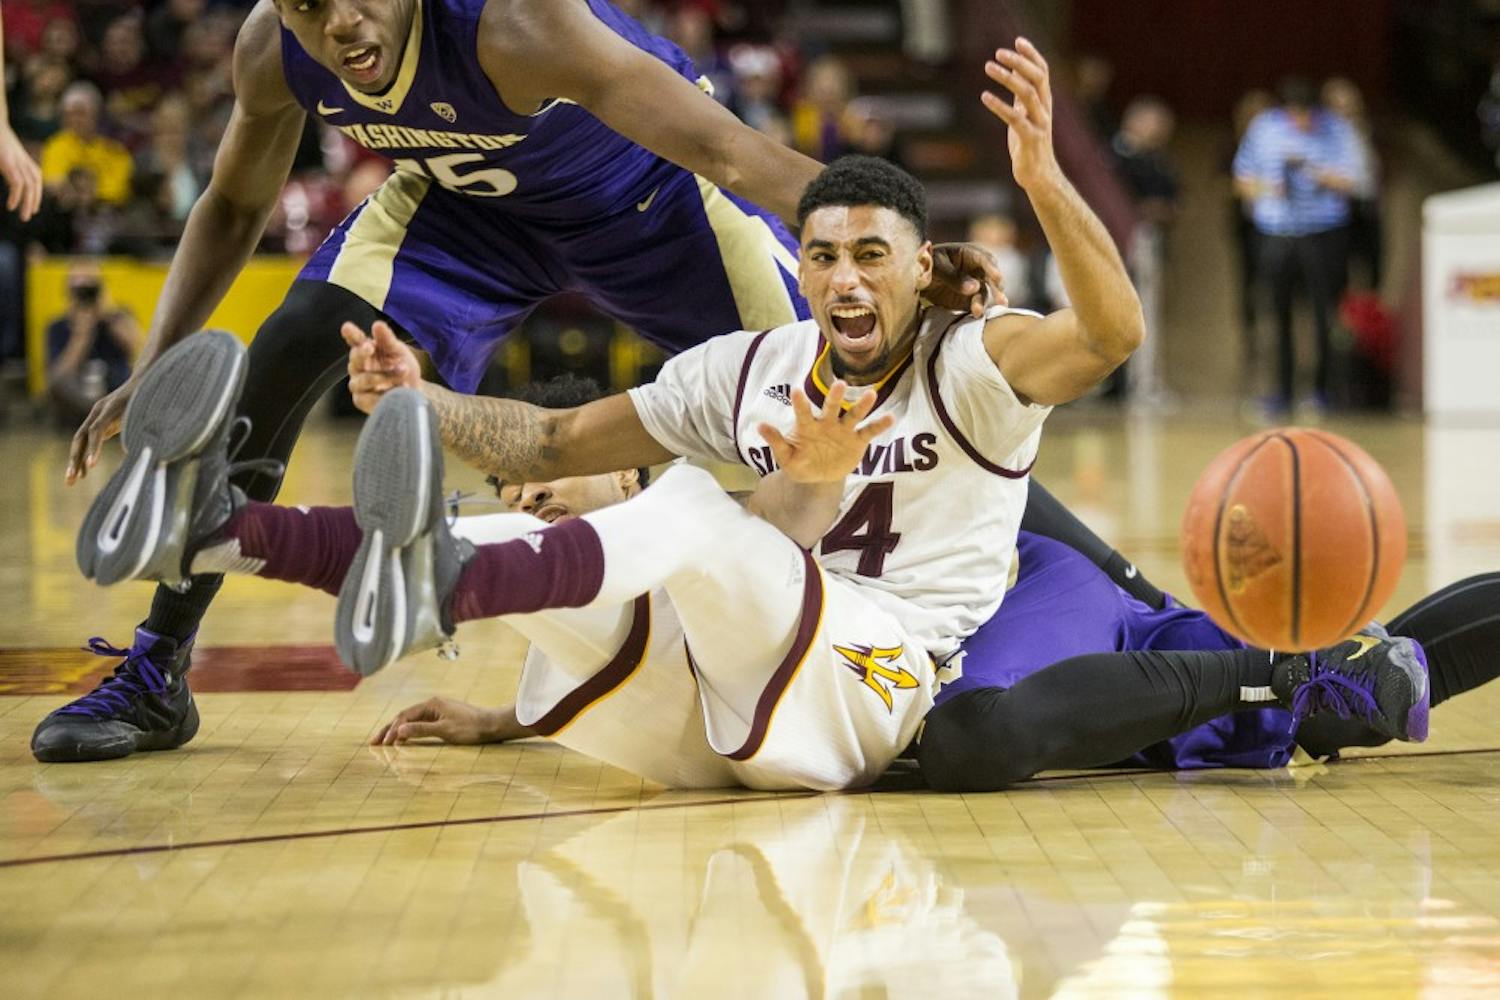 Arizona State Sun Devils guard Andre Spight (24) loses control of the ball during a game against the University of Washington Huskies in Wells Fargo Arena on Saturday, Jan. 16, 2015, in Tempe, Ariz. The Huskies won the matchup, 89-85.